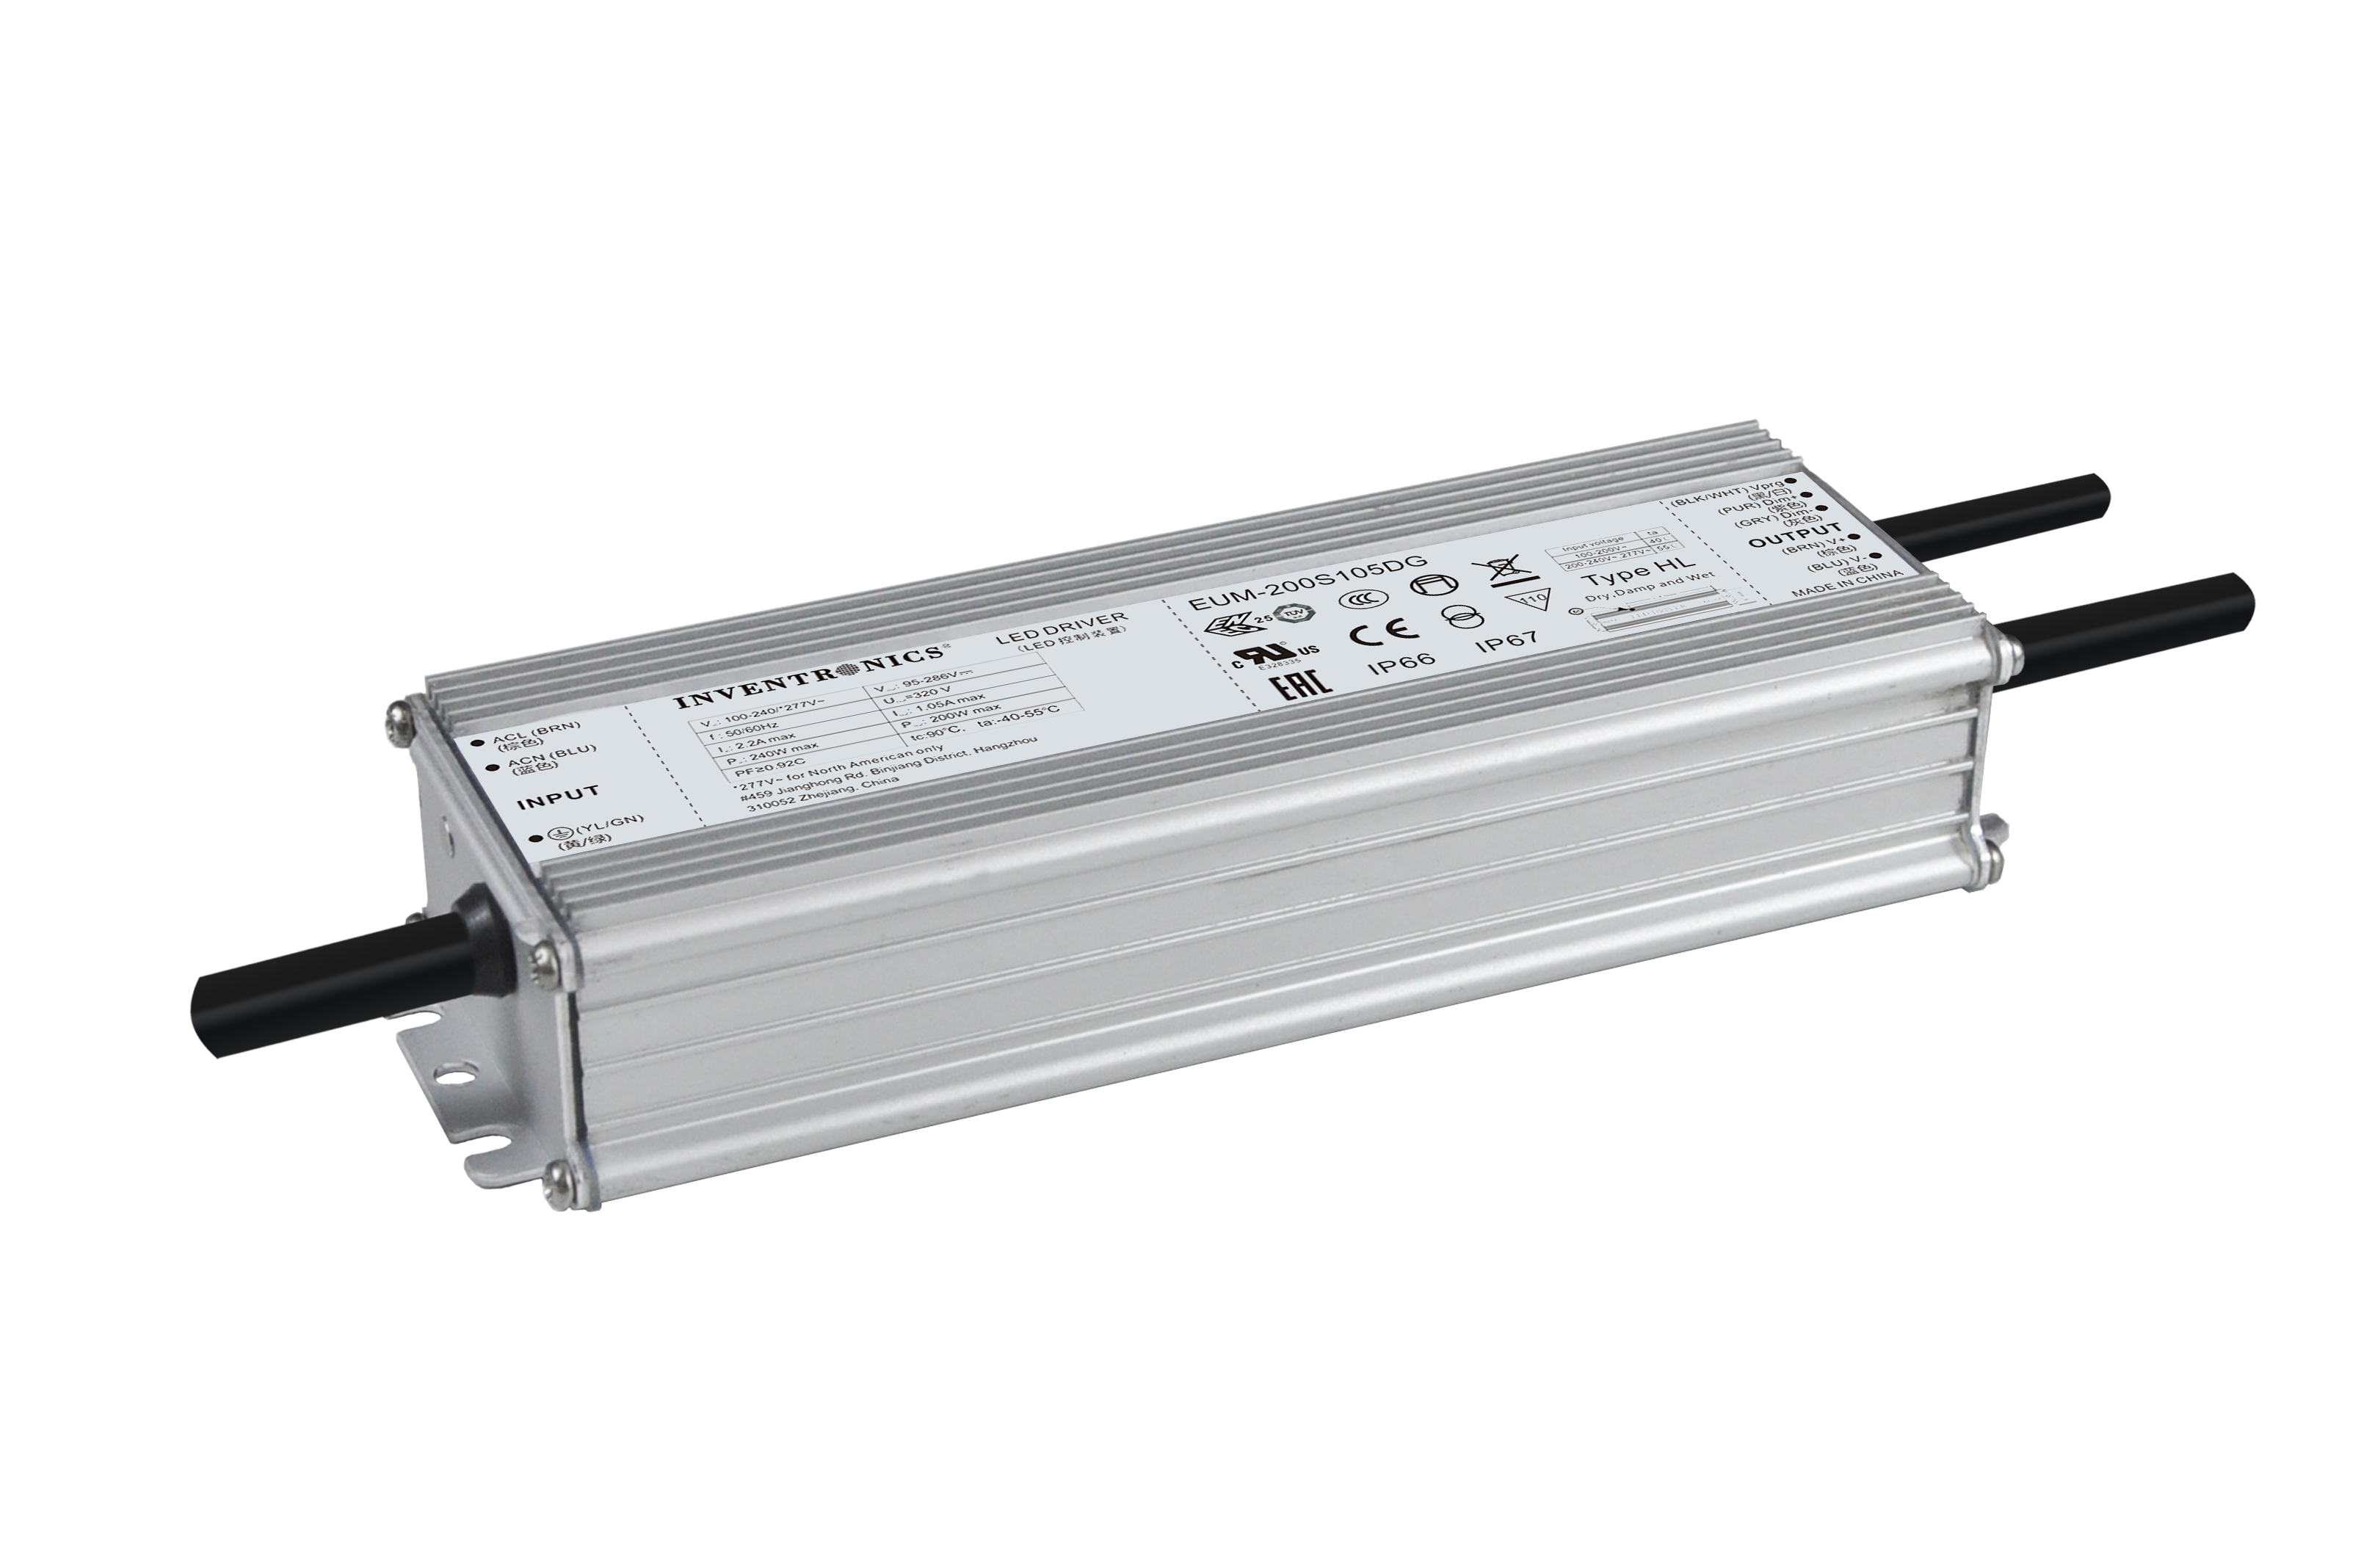 Chanzon LED Driver 1500mA (Constant Current Output) 18V-39V (In:100-240V  AC-DC) (6-12) x5 30W 40W 50W 60W IP67 Waterproof High Power Supply 1500 mA